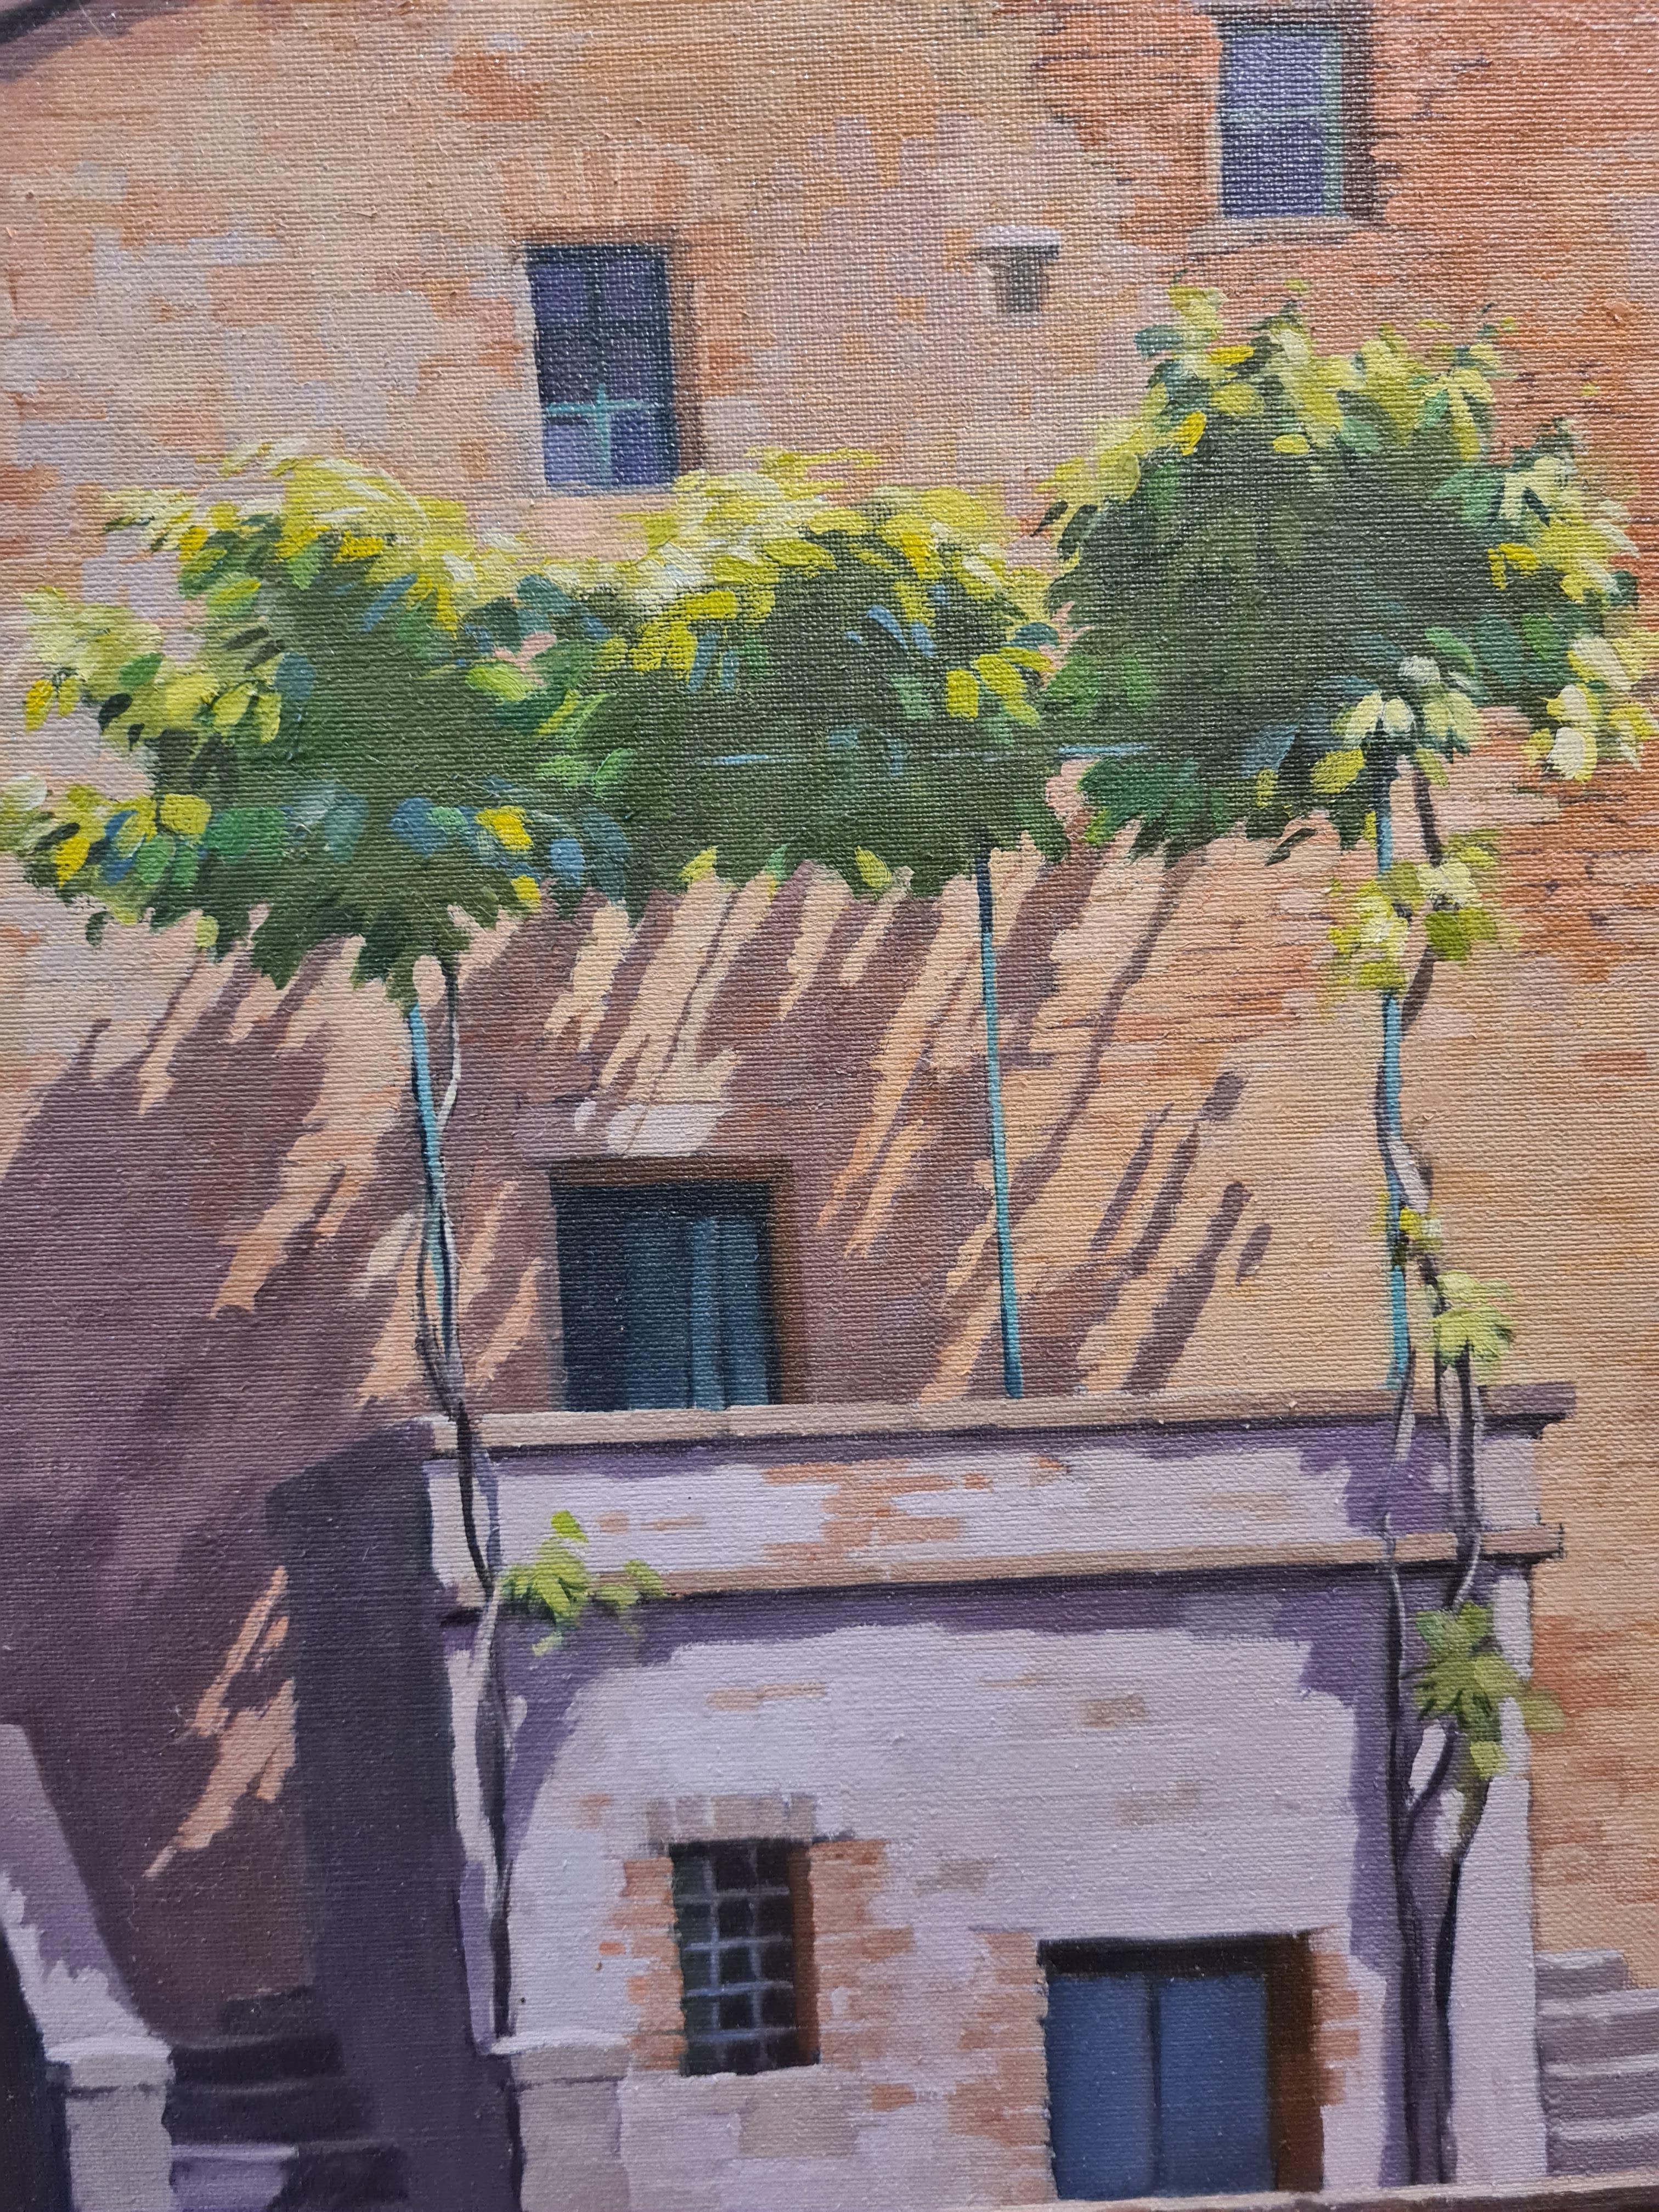 The Square, Monticchiello, Tuscany, Italy, Large Scale Oil on Canvas. - Realist Art by Anne Donald